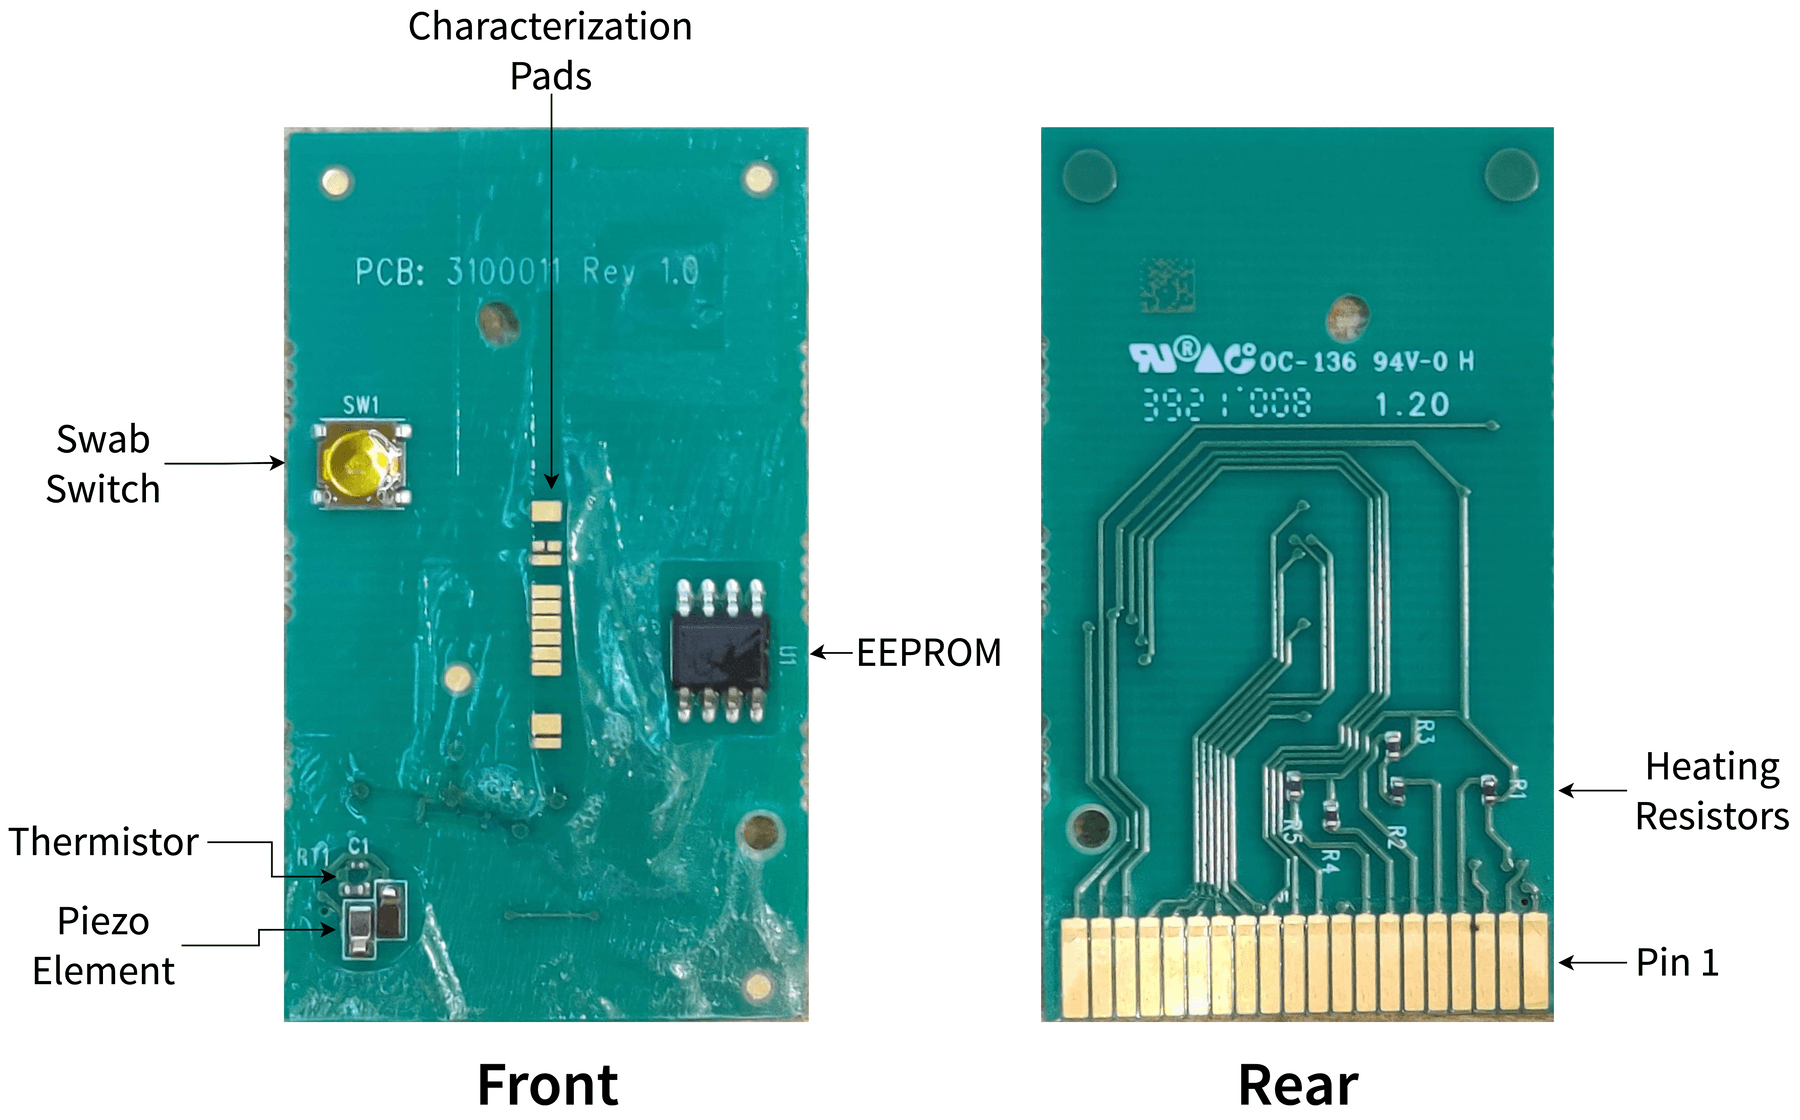 Annotated diagram of the PCB